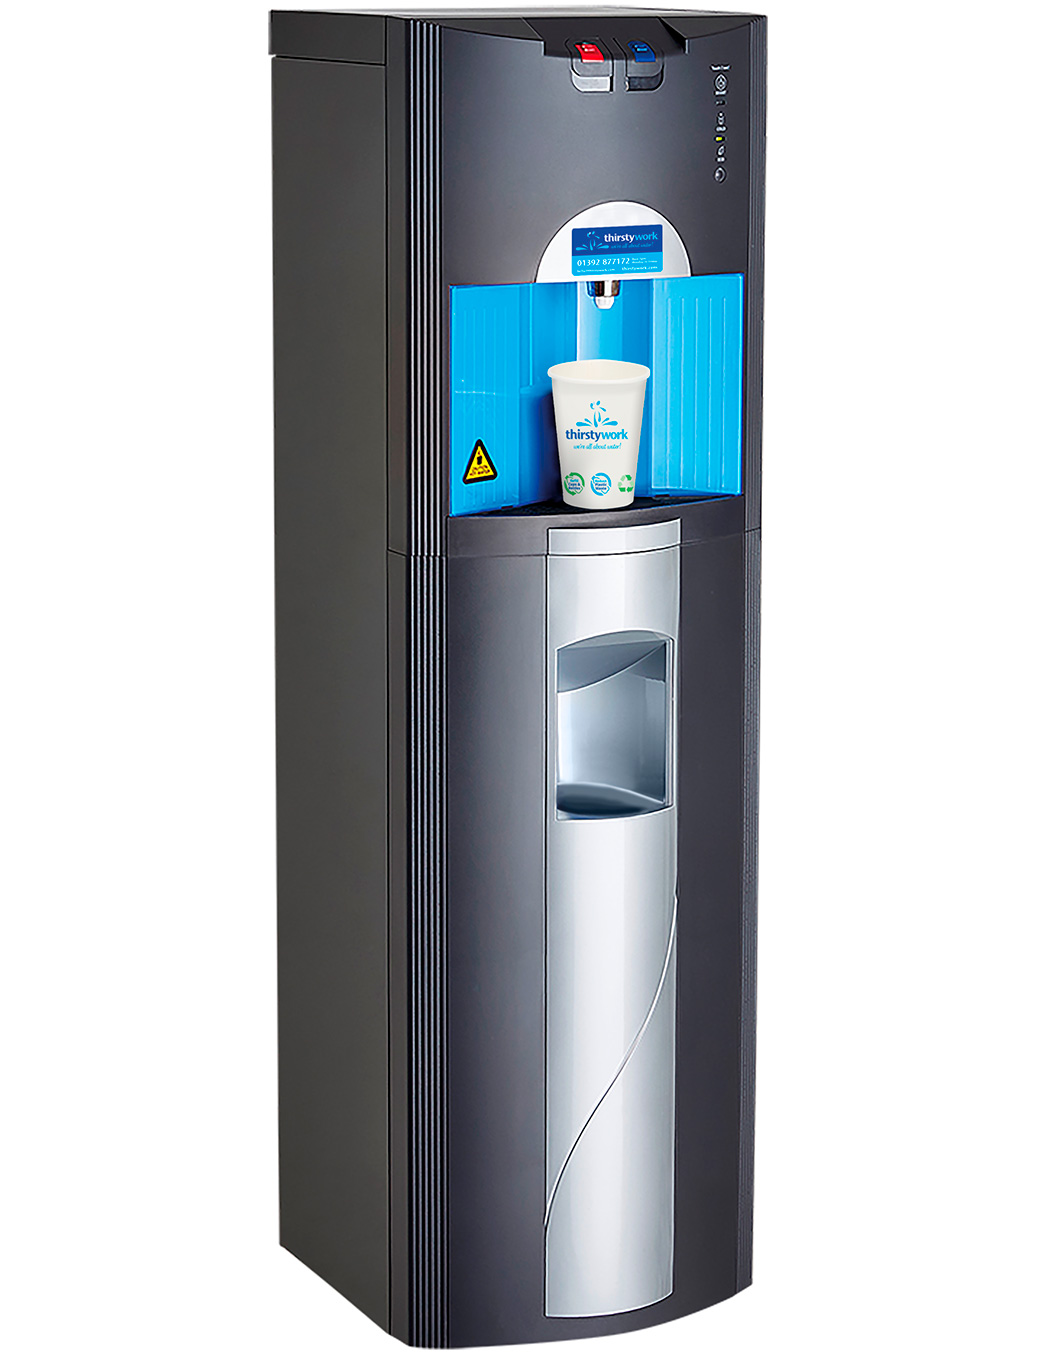 Arctic Star 55 Floor Standing Water Cooler Hot and Cold Water